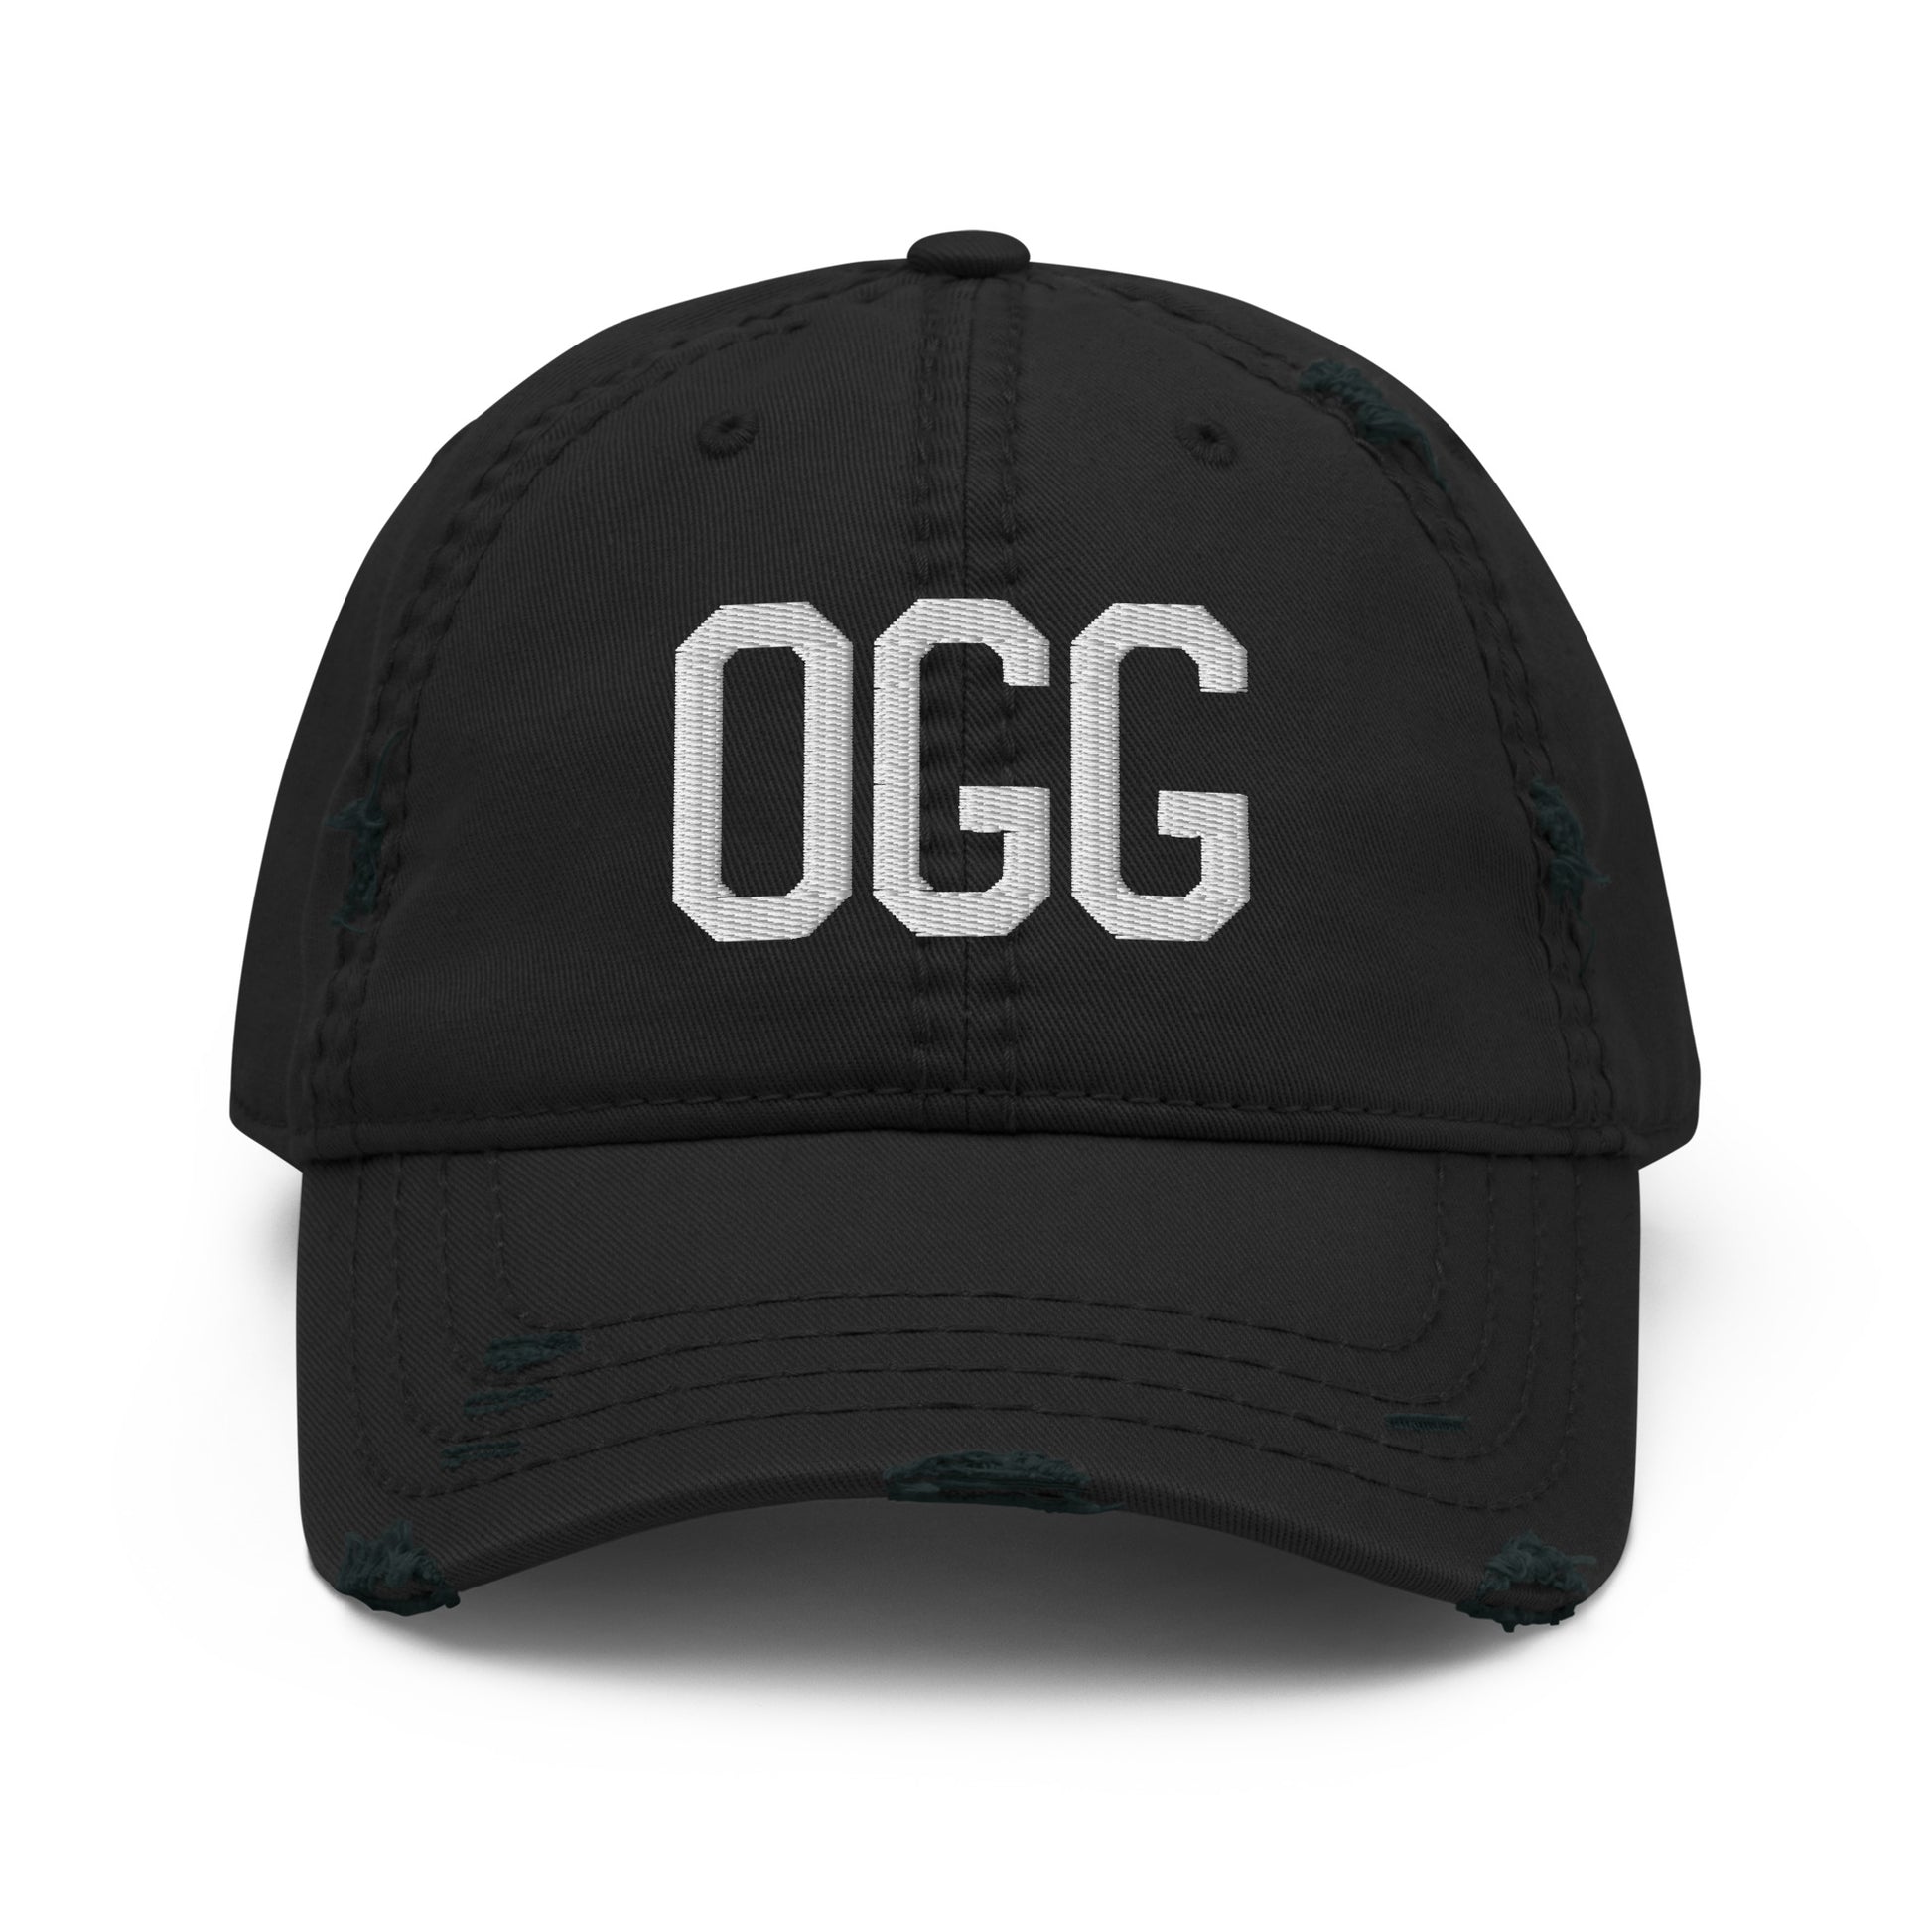 Airport Code Distressed Hat - White • OGG Maui • YHM Designs - Image 10